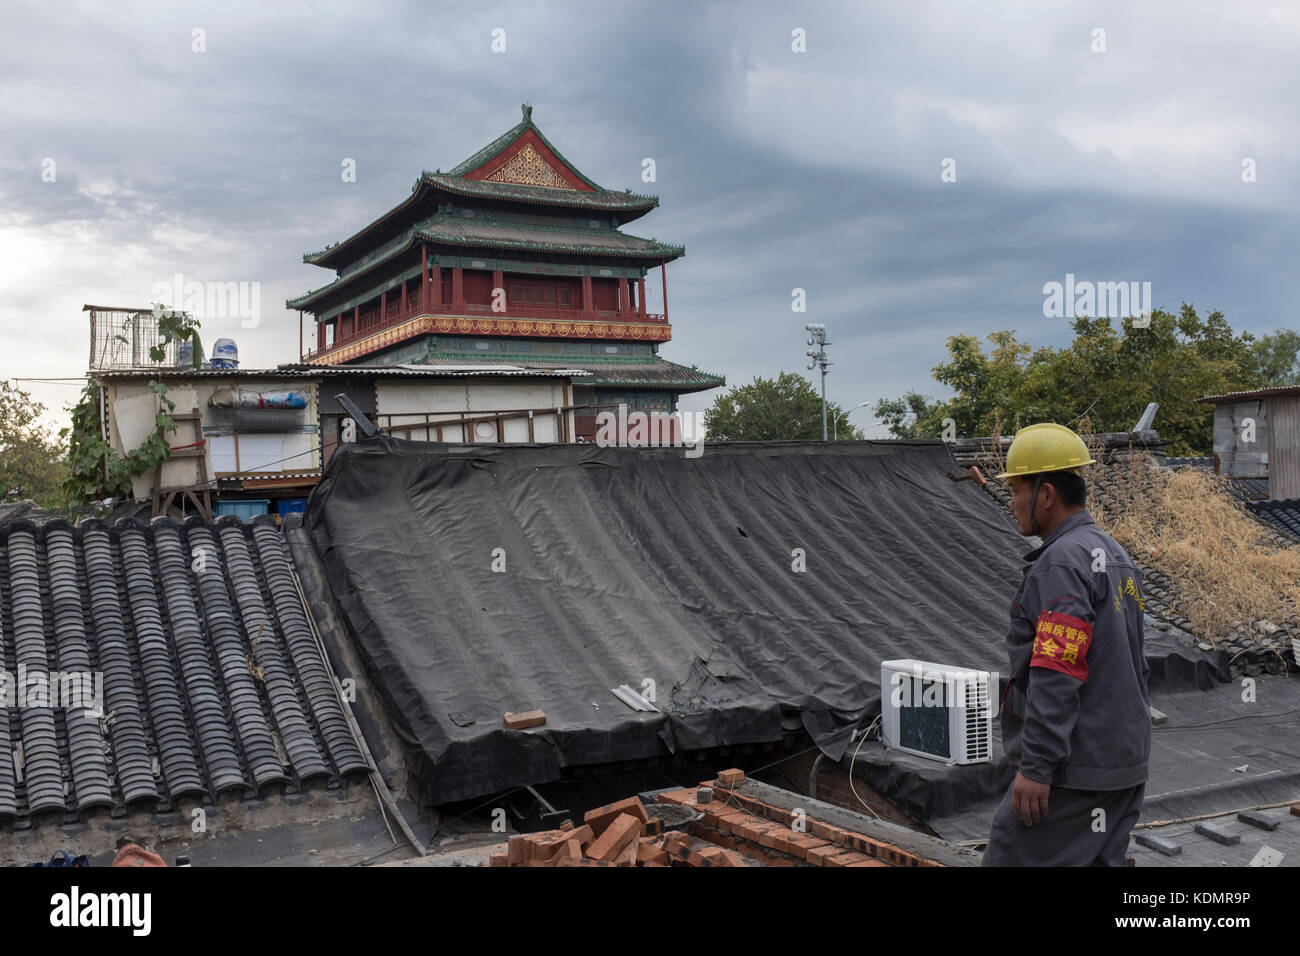 Workers who belong to Housing Authority restore an old house in front of the Drum Tower in Beijing, China. Stock Photo